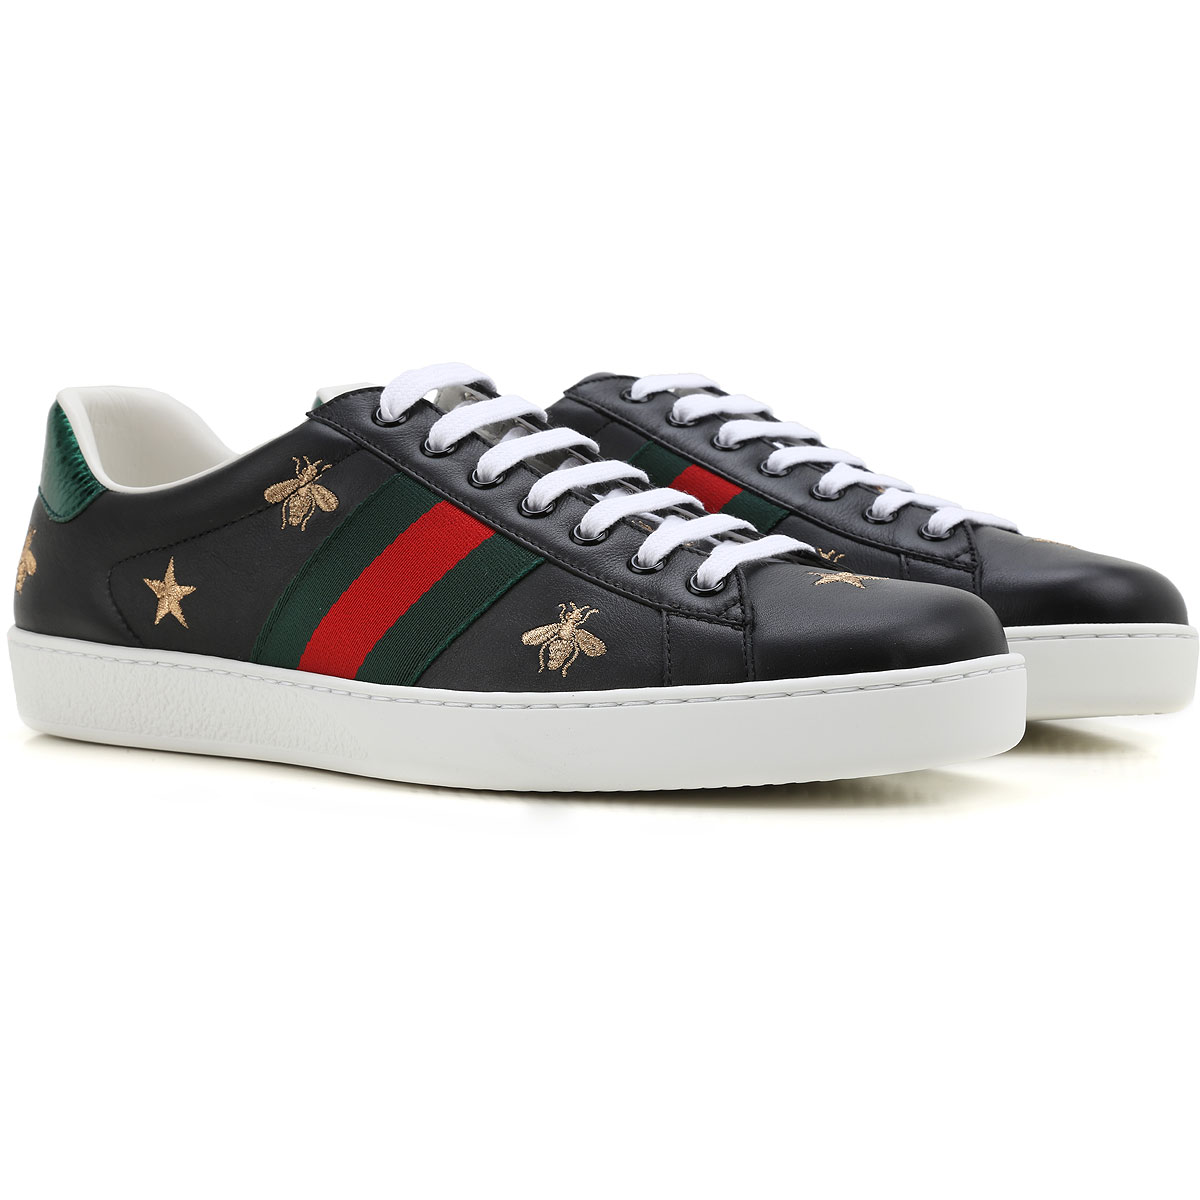 Mens Shoes Gucci, Style code: 386750 